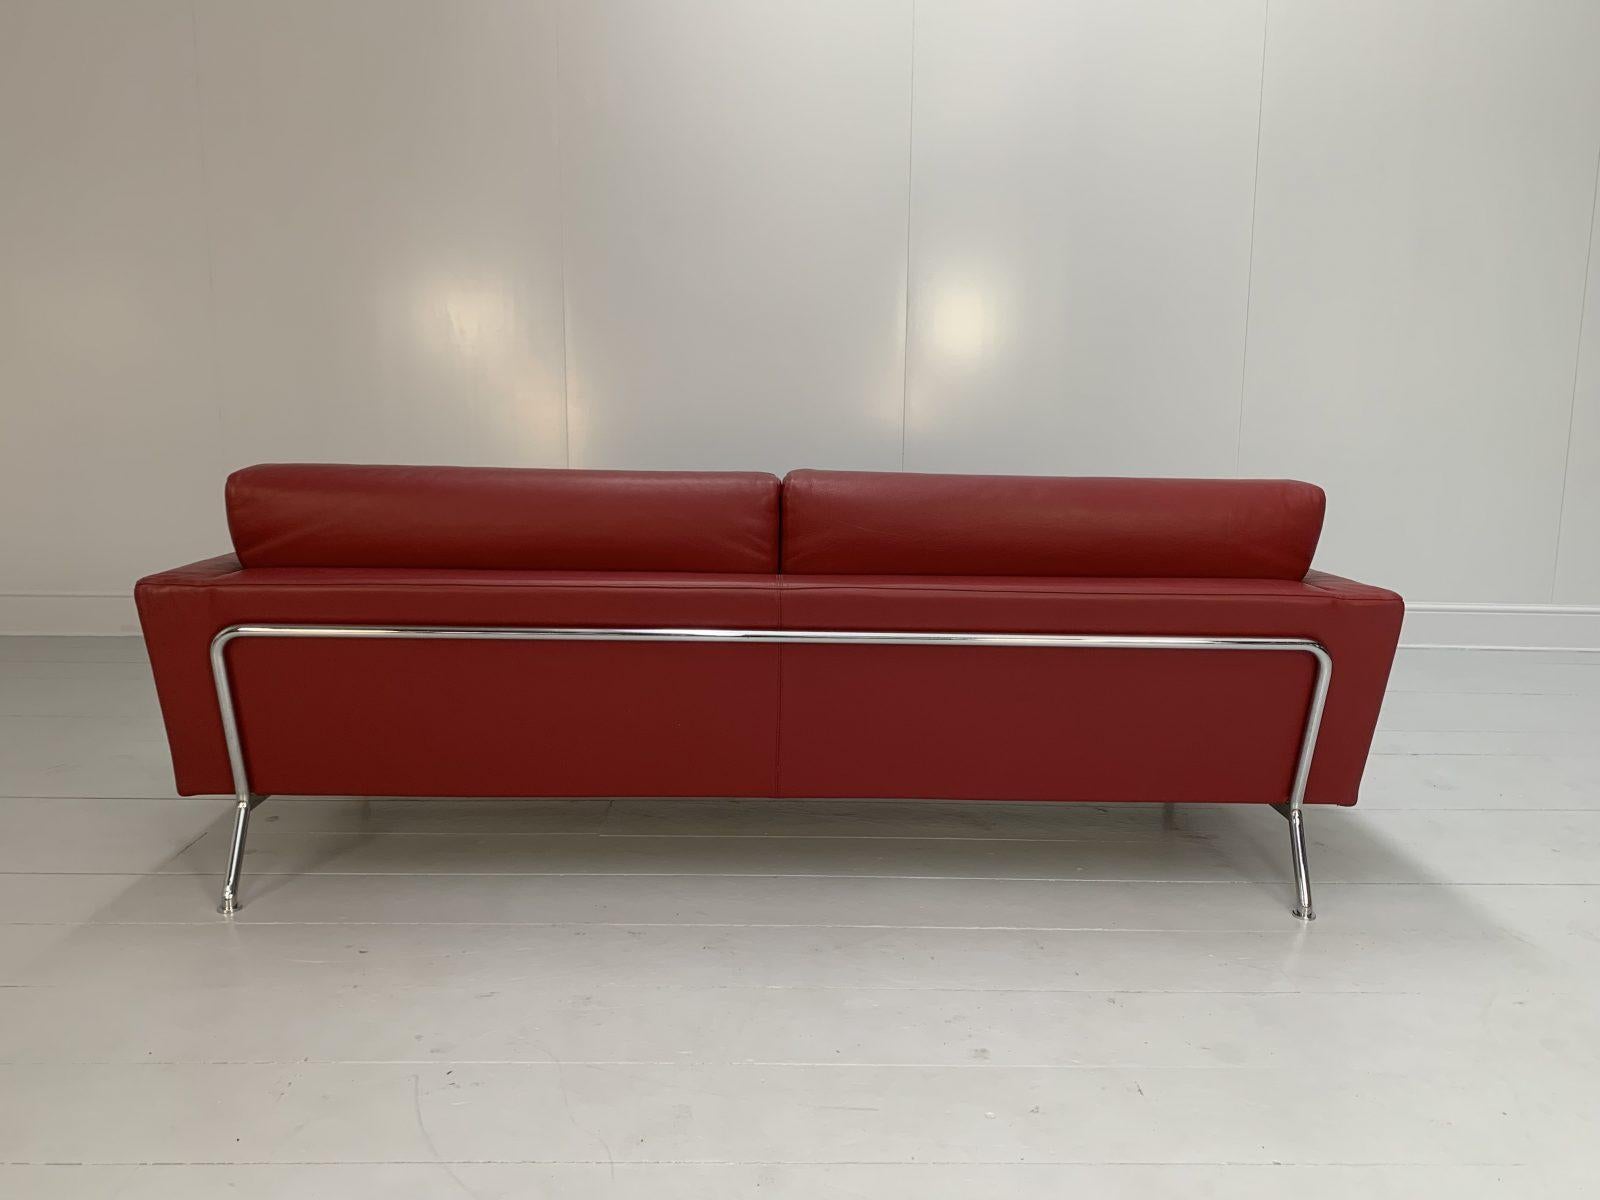 Cassina “253 Nest” 2.5-Seat Sofa & Bench Footstool – In Red “Pelle” Leather 8